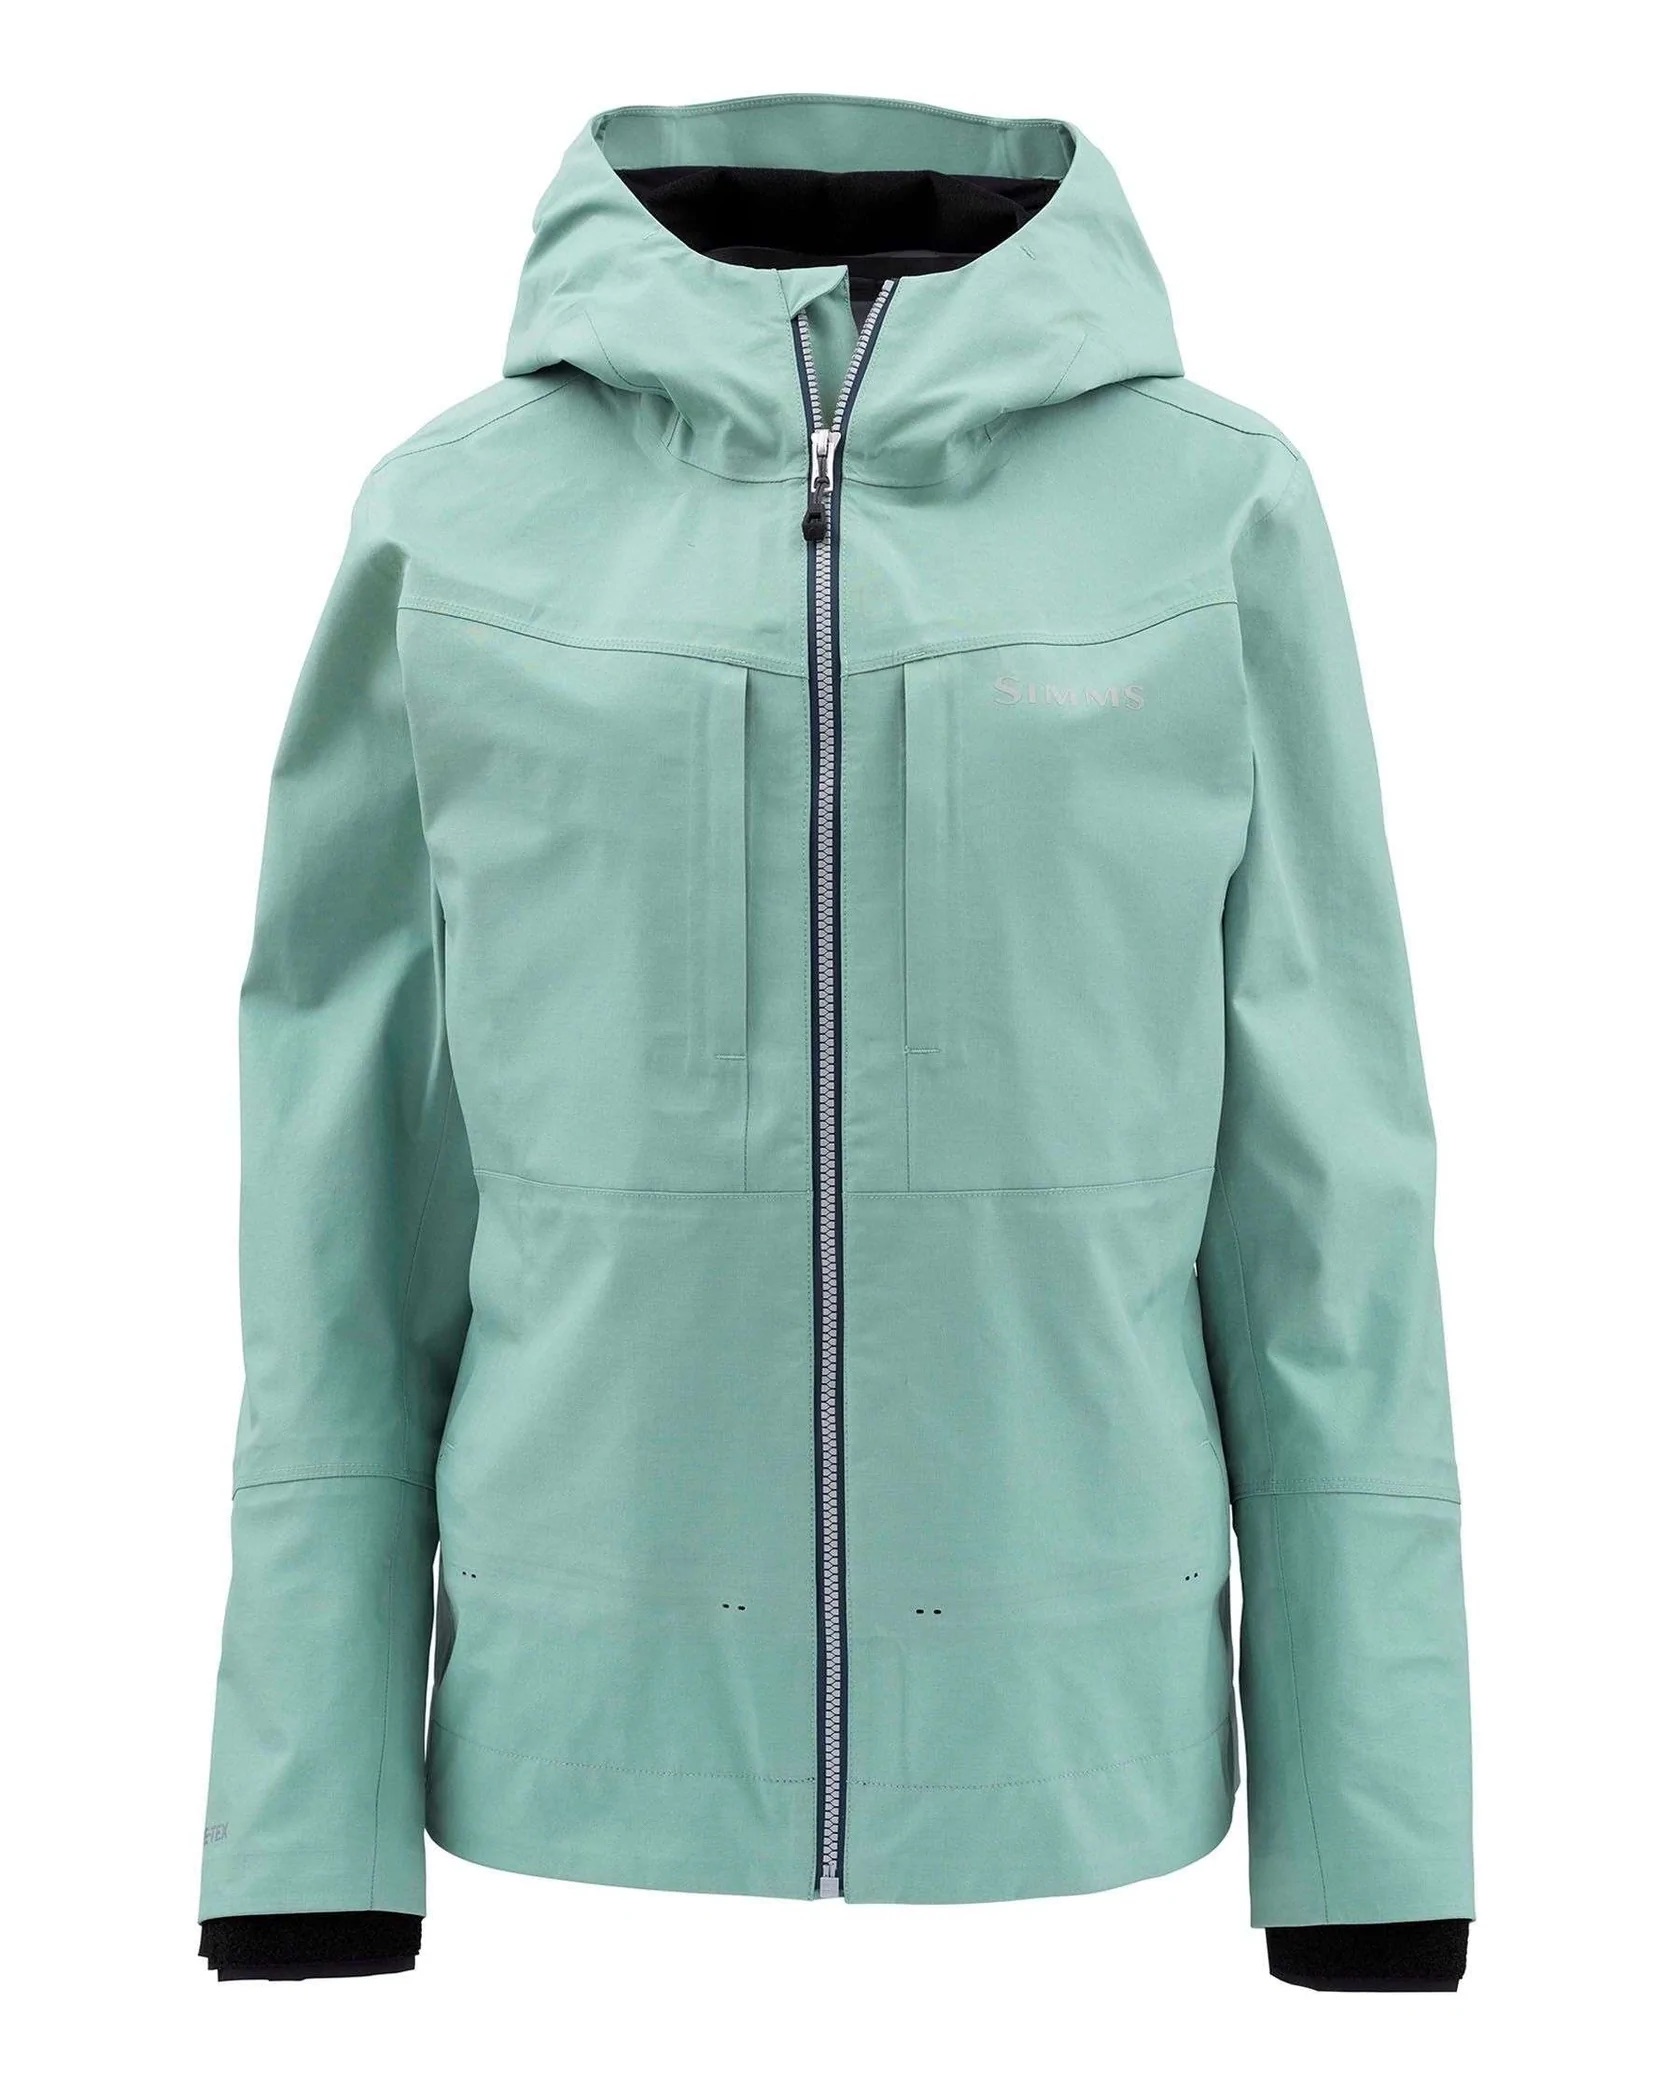 Simms W's G3 Guide Fishing Jacket - Seafoam - Extra Small